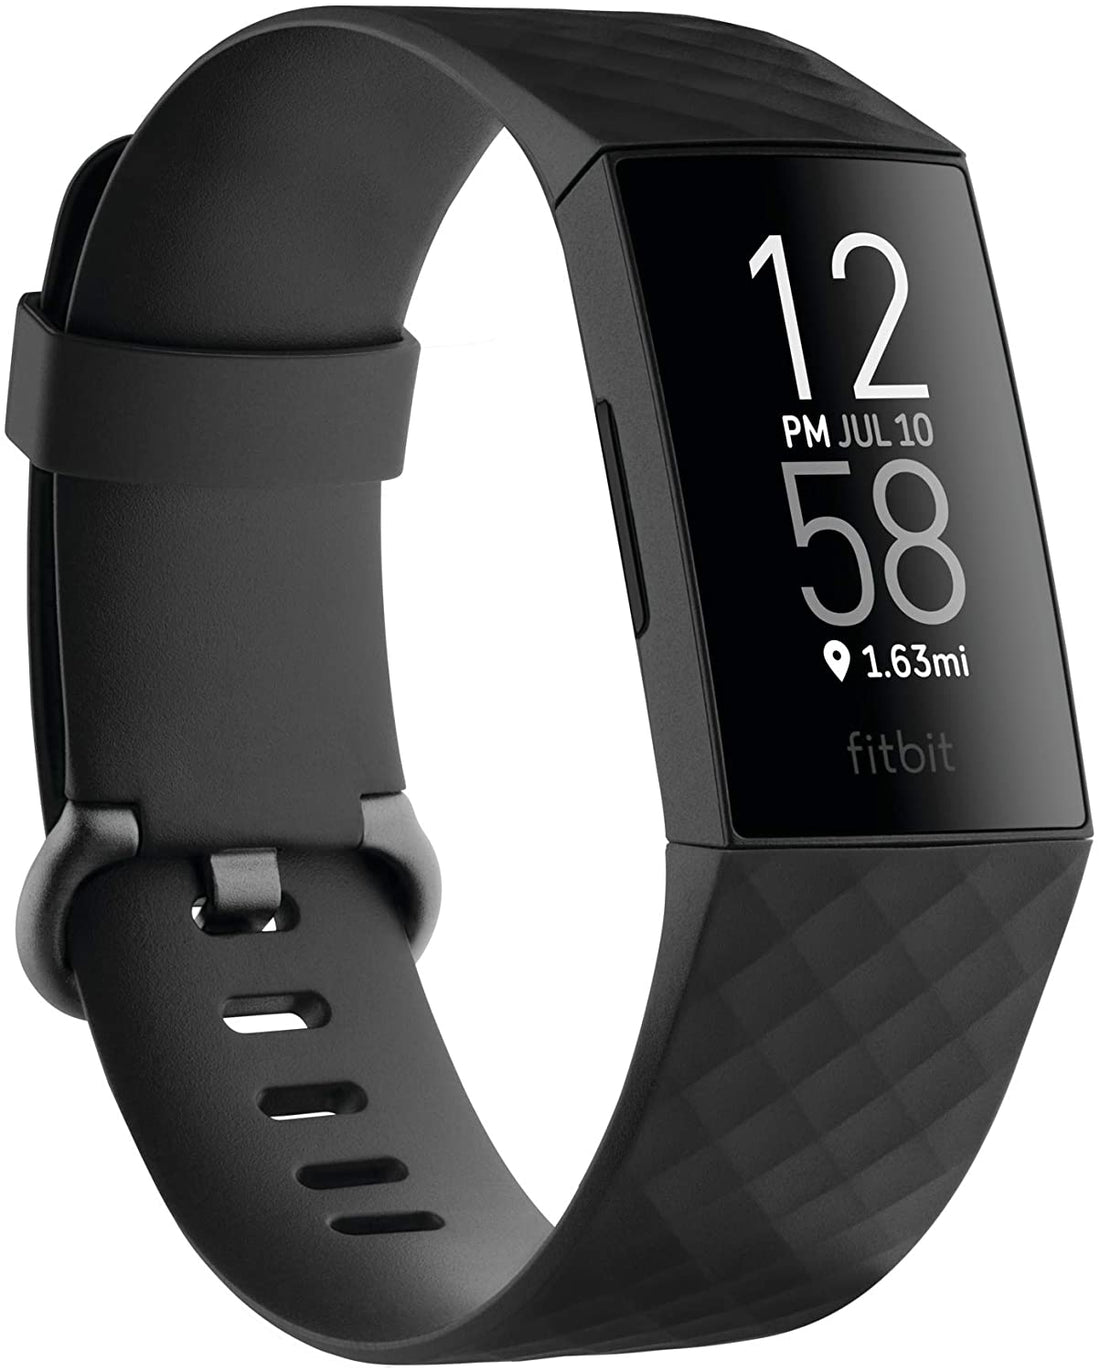 Fitbit Charge 4 Fitness &amp; Activity Tracker with Built-in GPS, Heart Rate - Black (New)